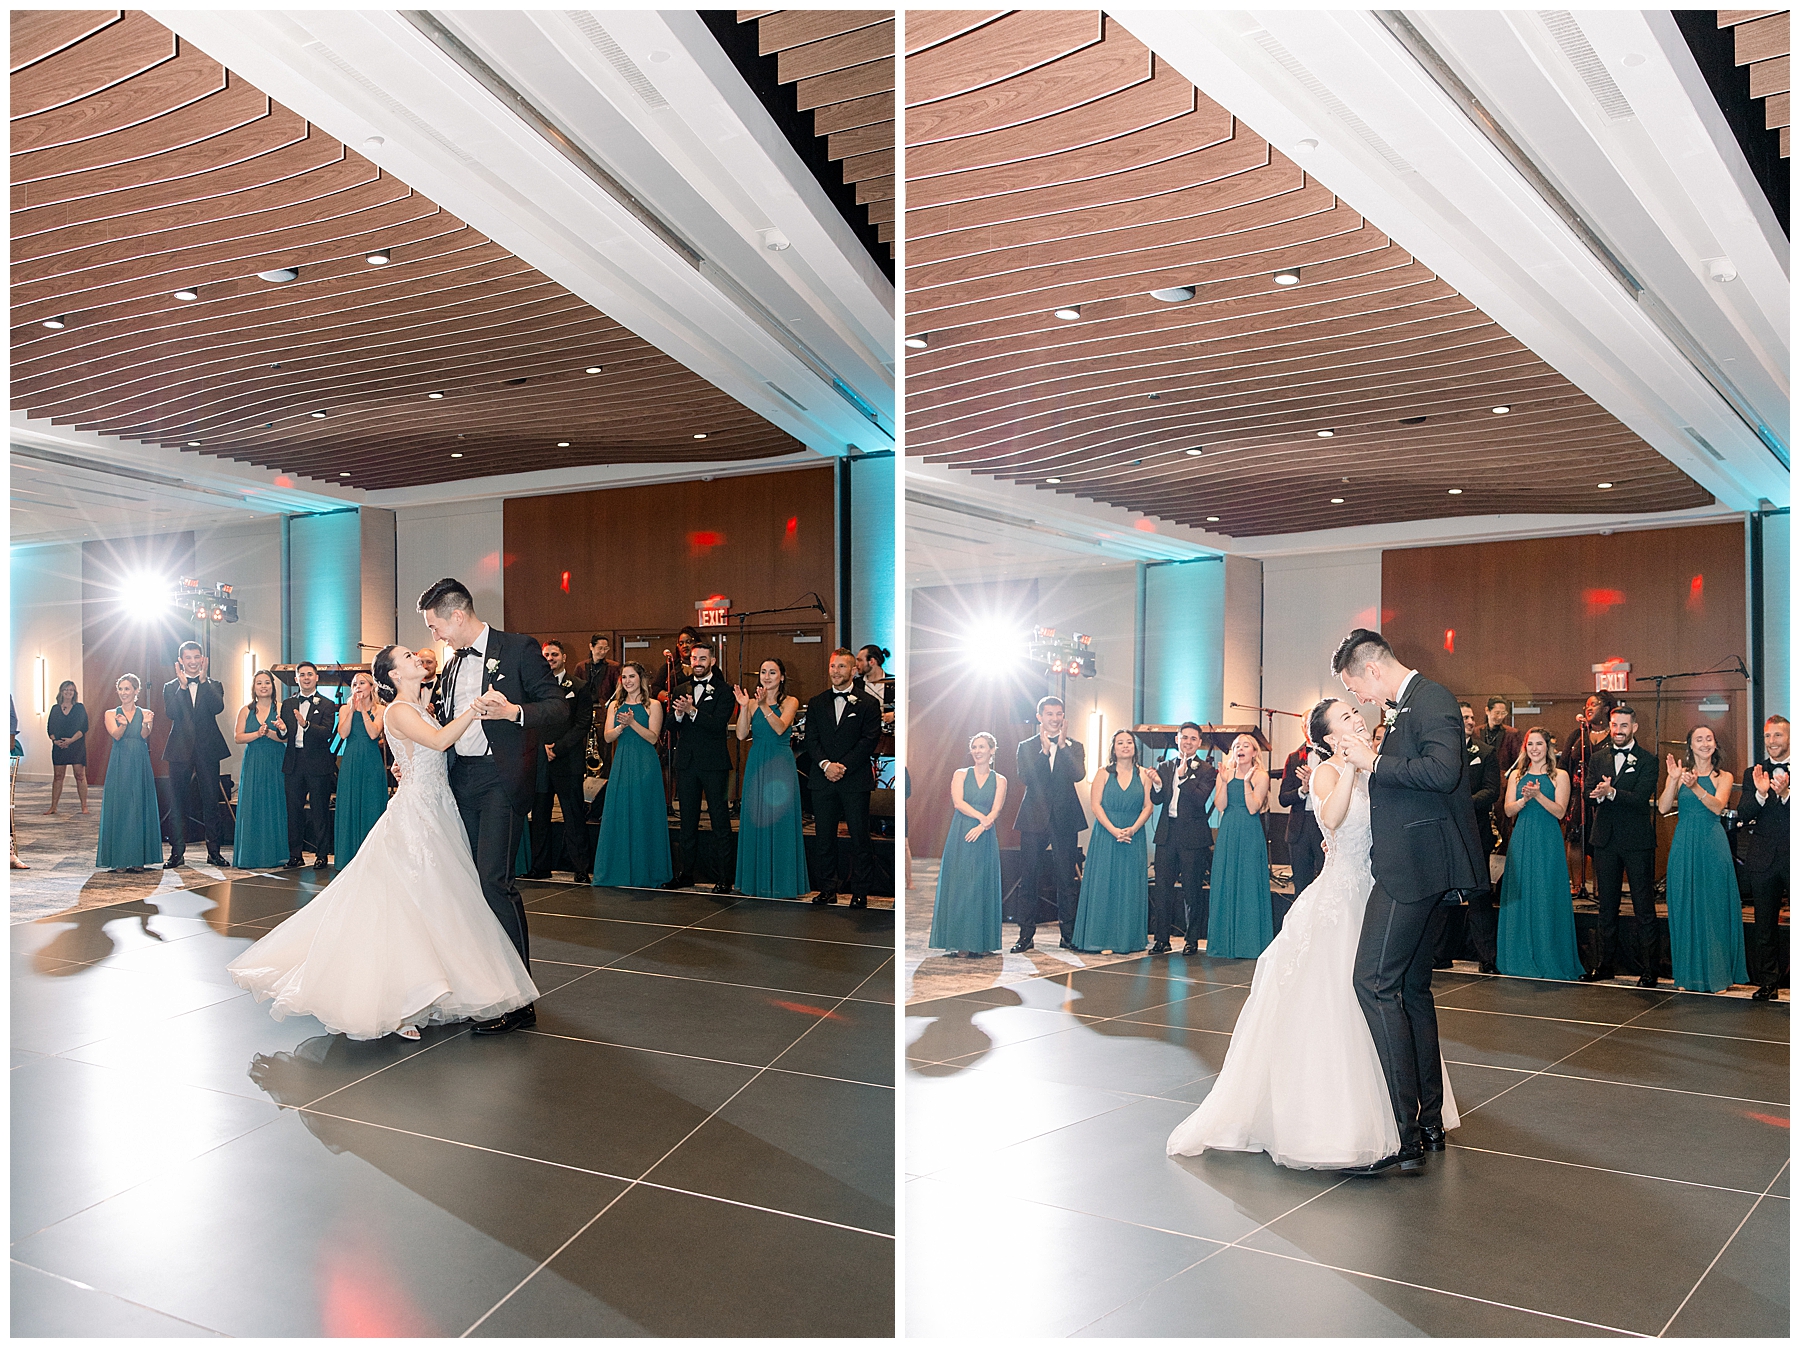 husband and wife share their first dance at the reception